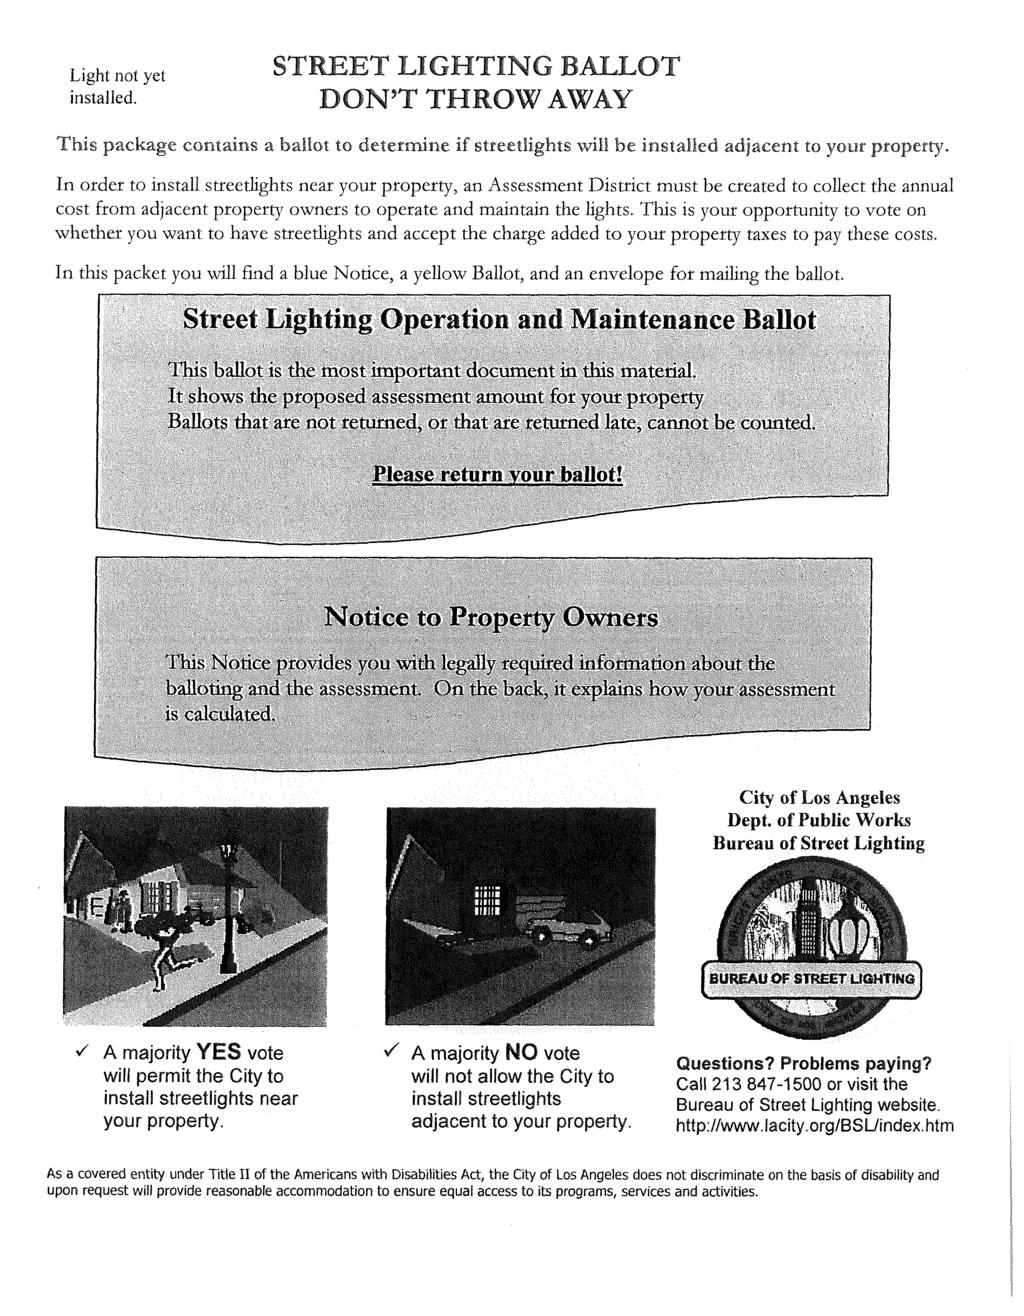 Light not yet installed. STREET LIGHTING BALLOT DON T THROW AWAY This package contains a ballot to deterine if streetlights will be installed adjacent to your property.